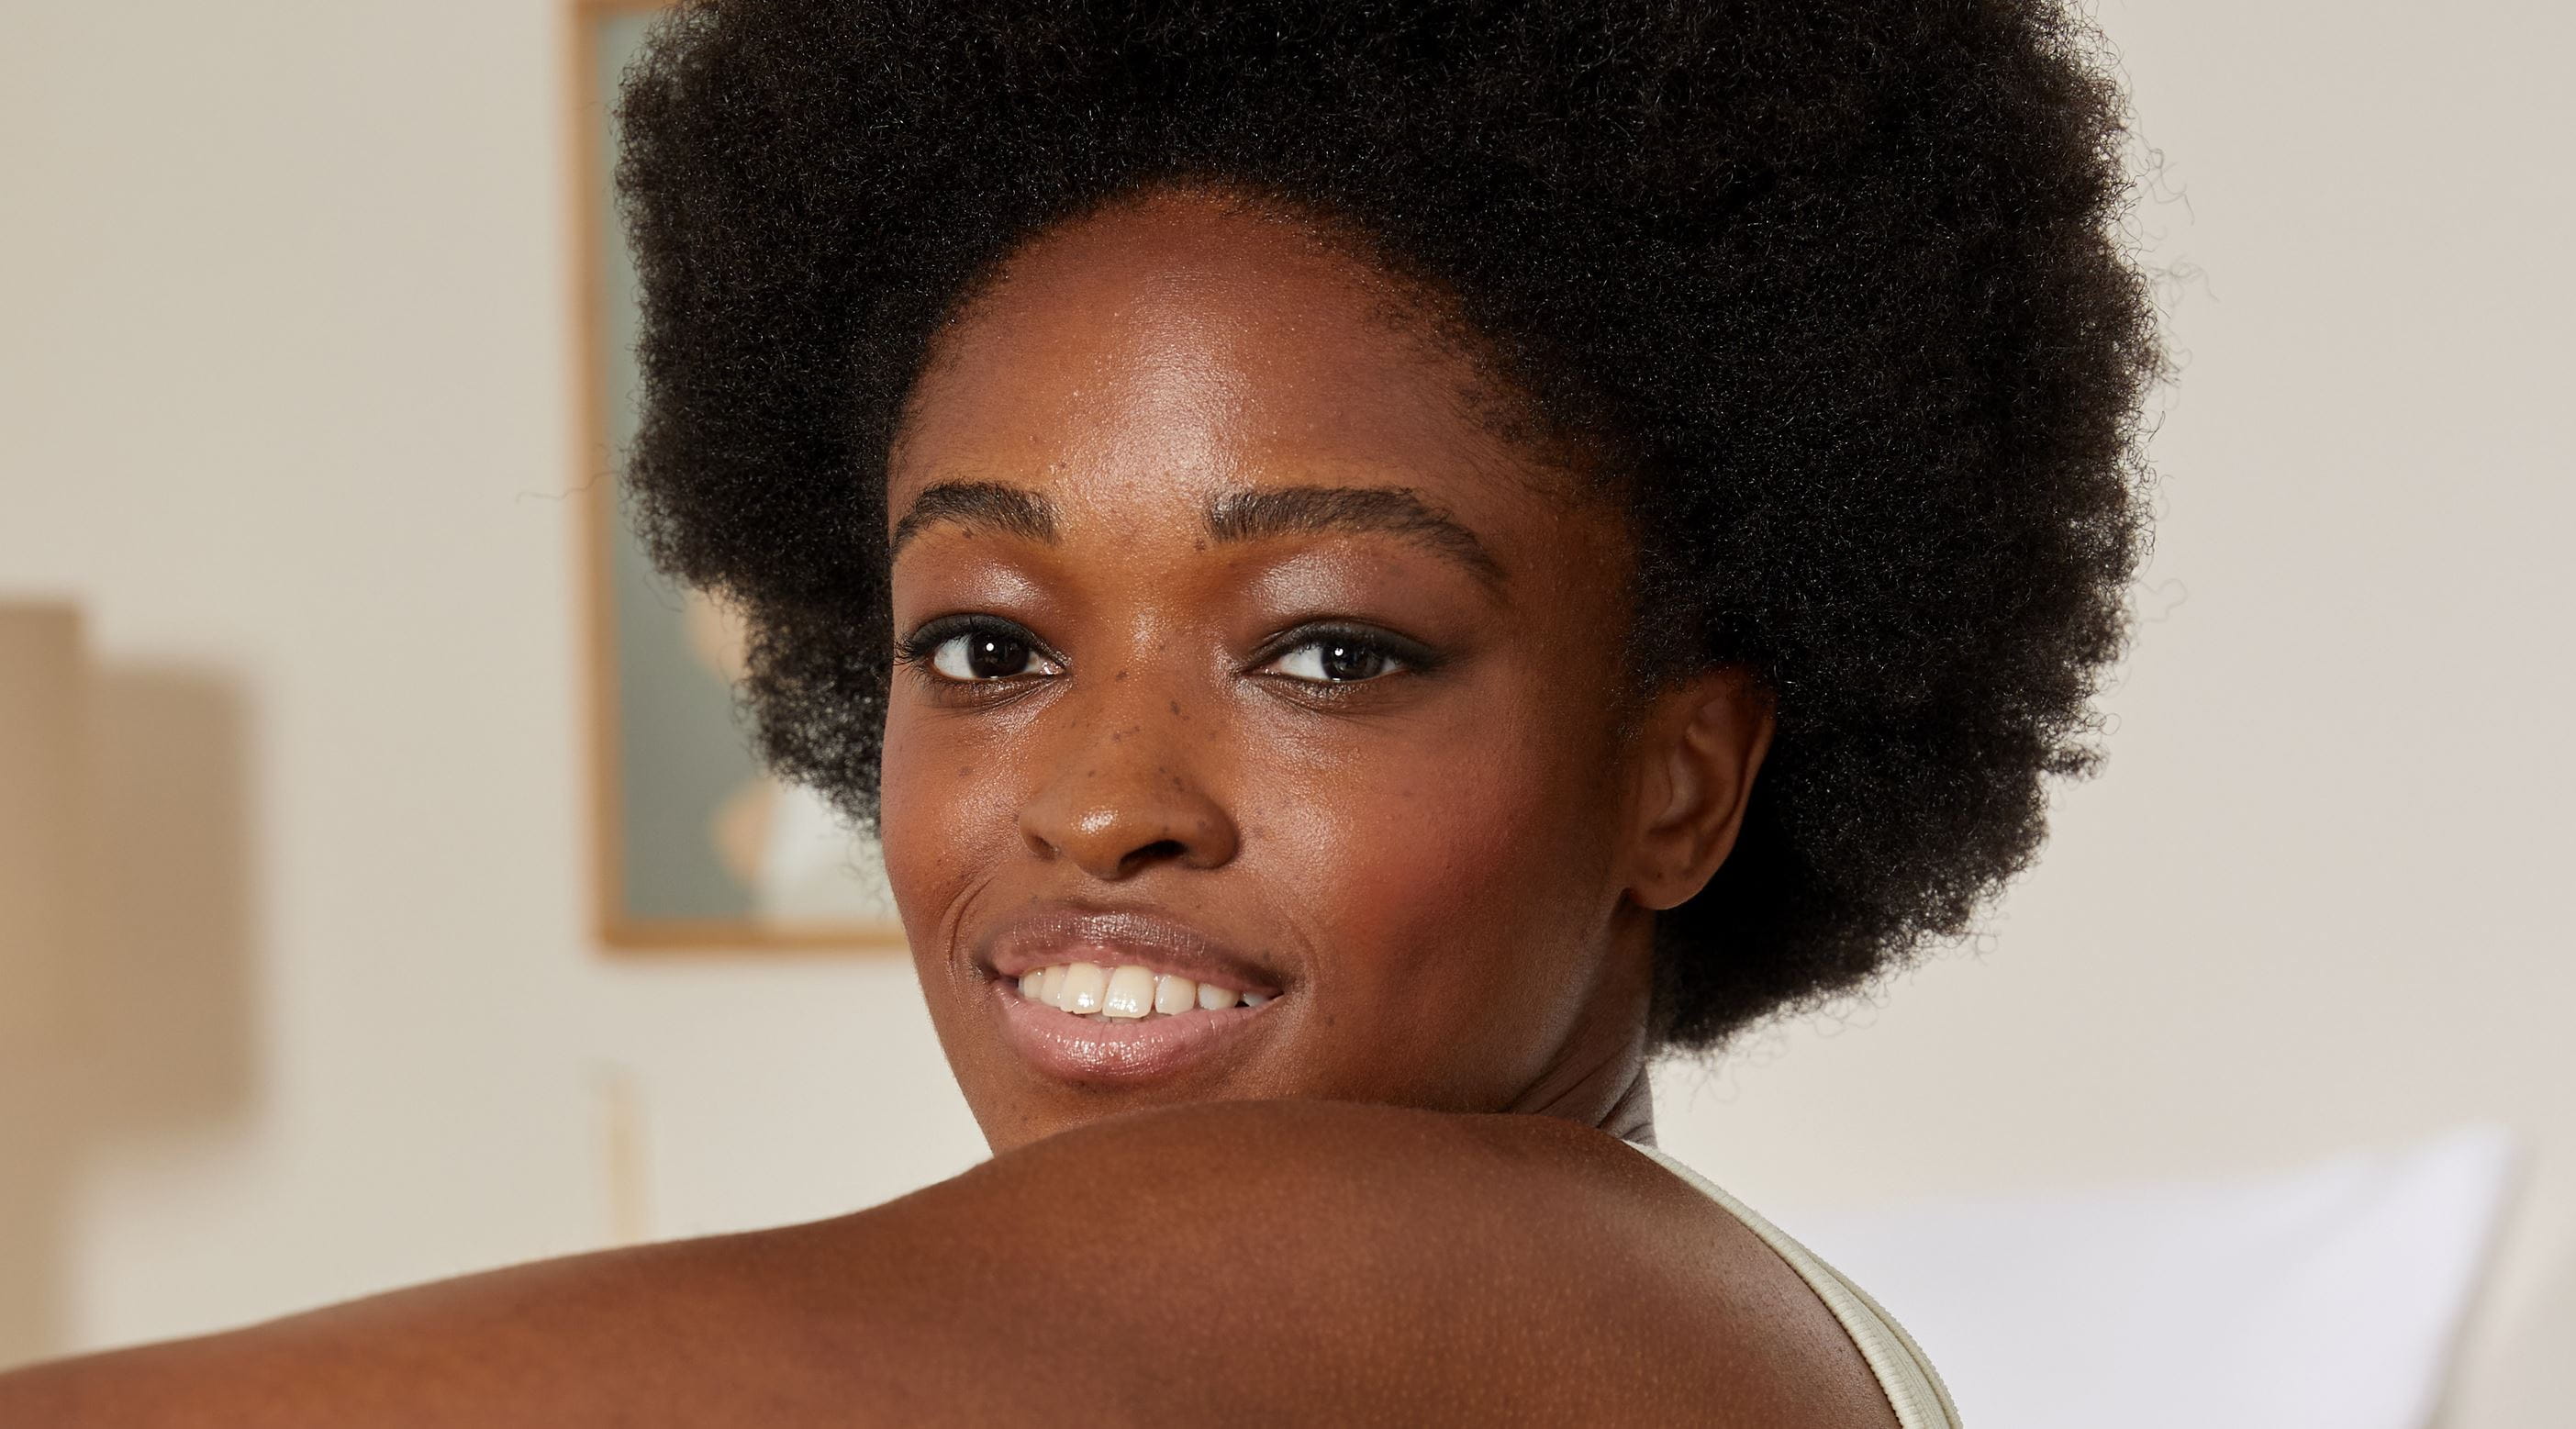 woman with afro-textured hair, smiling